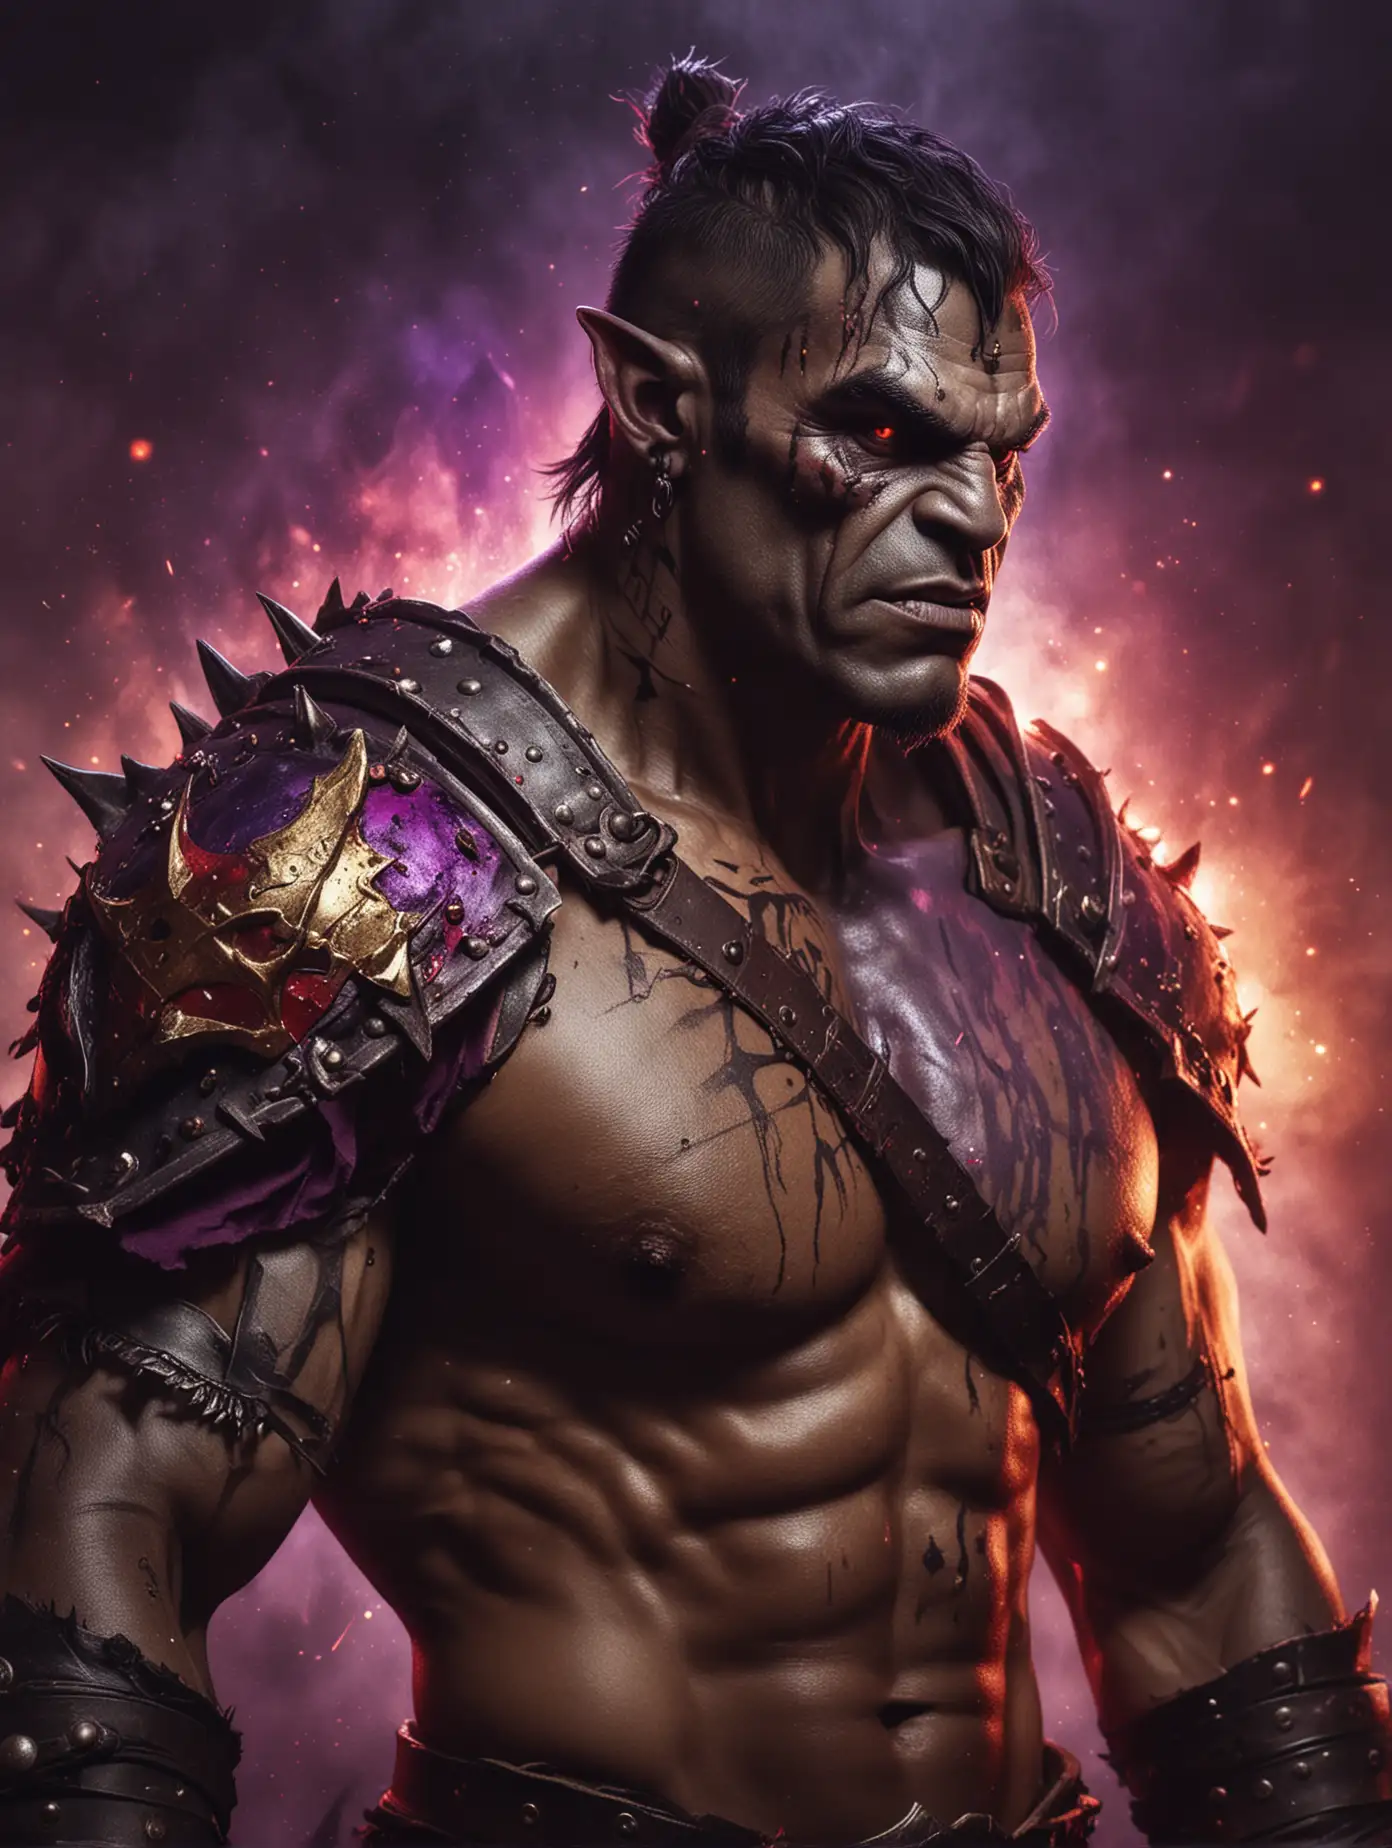 Shirtless Orc Gladiator Amidst Black and Red Fog with Purple Flames and Gold Sparks